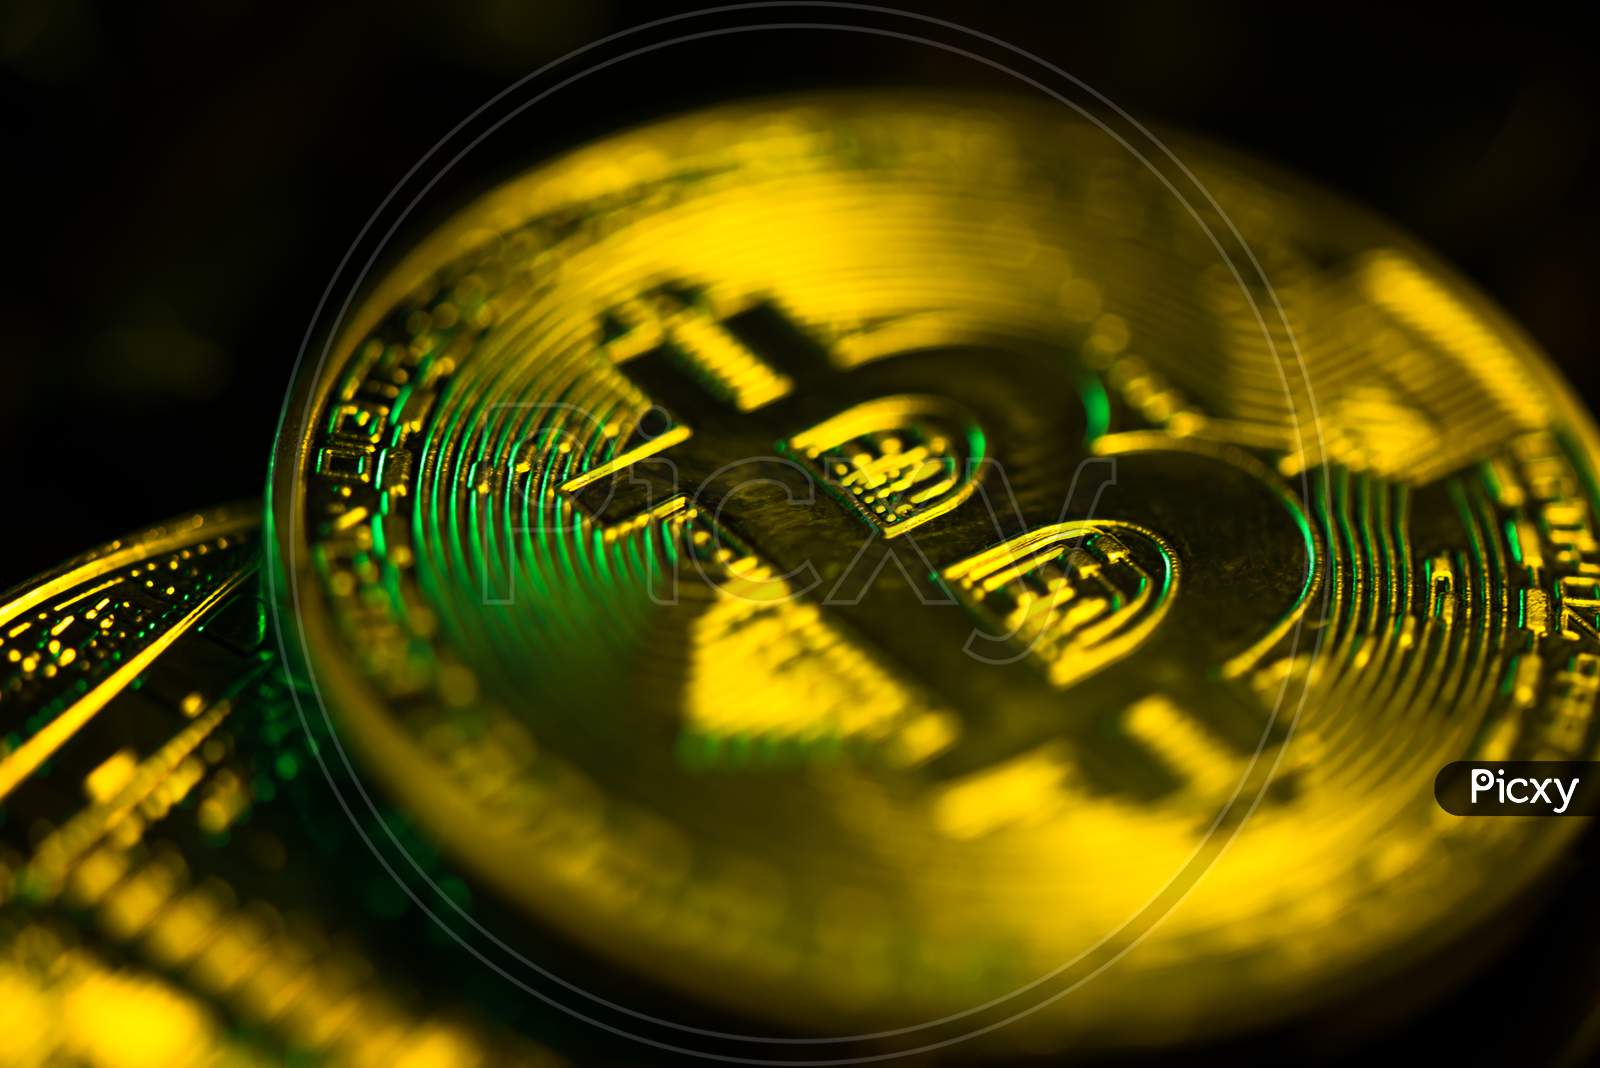 Golden Bitcoins Cryptocurrency, 3D Illustration